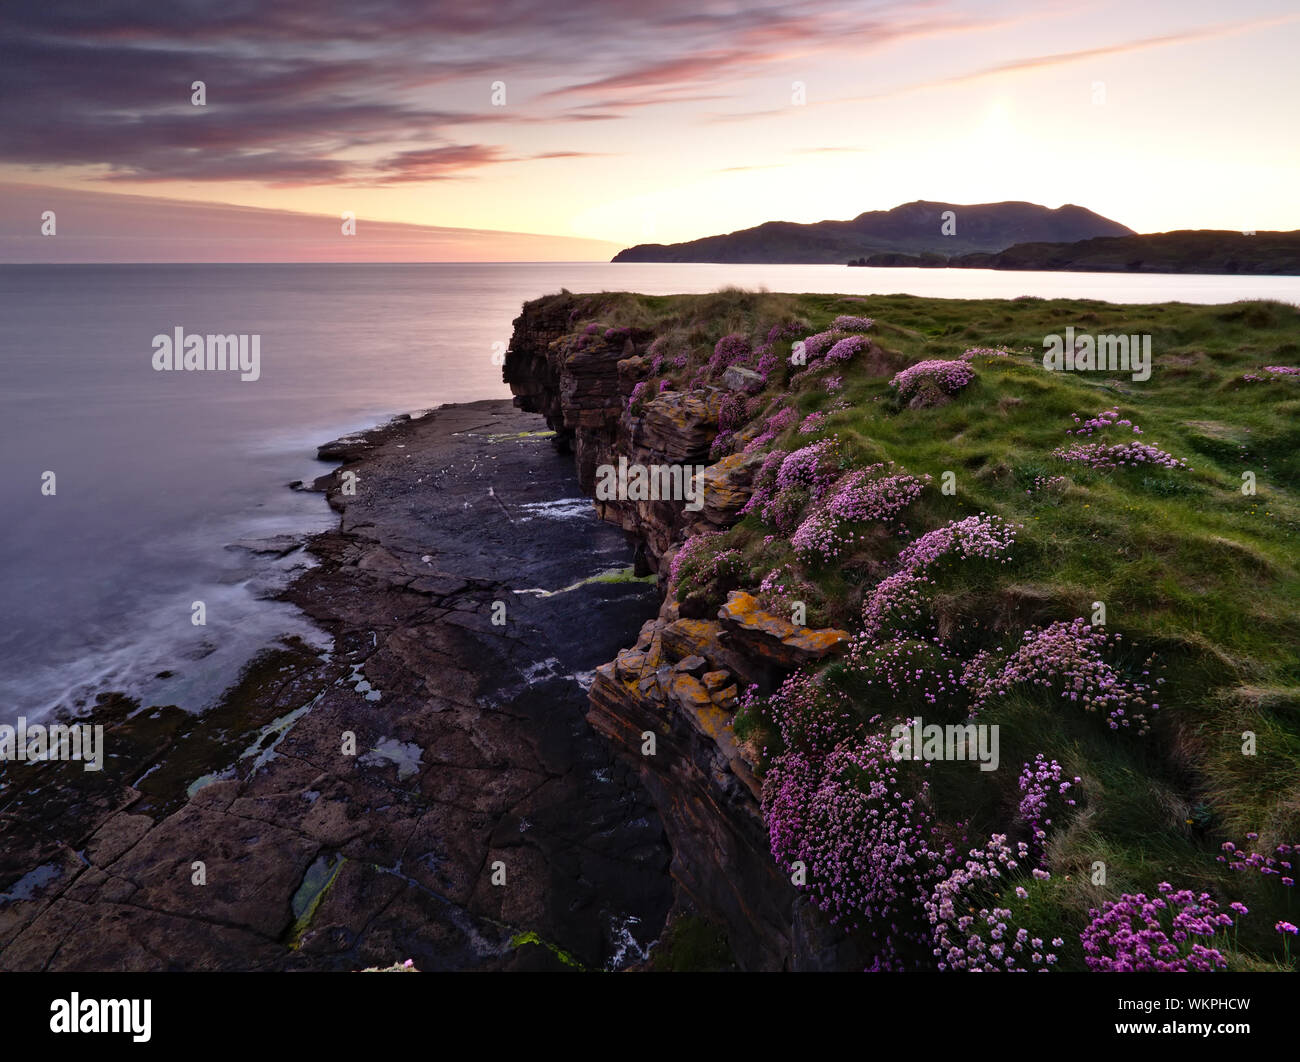 Sunset at Muckross Head, Co. Donegal with rocky shoreline dotted with small pink flowers in the foreground (long exposure) Stock Photo